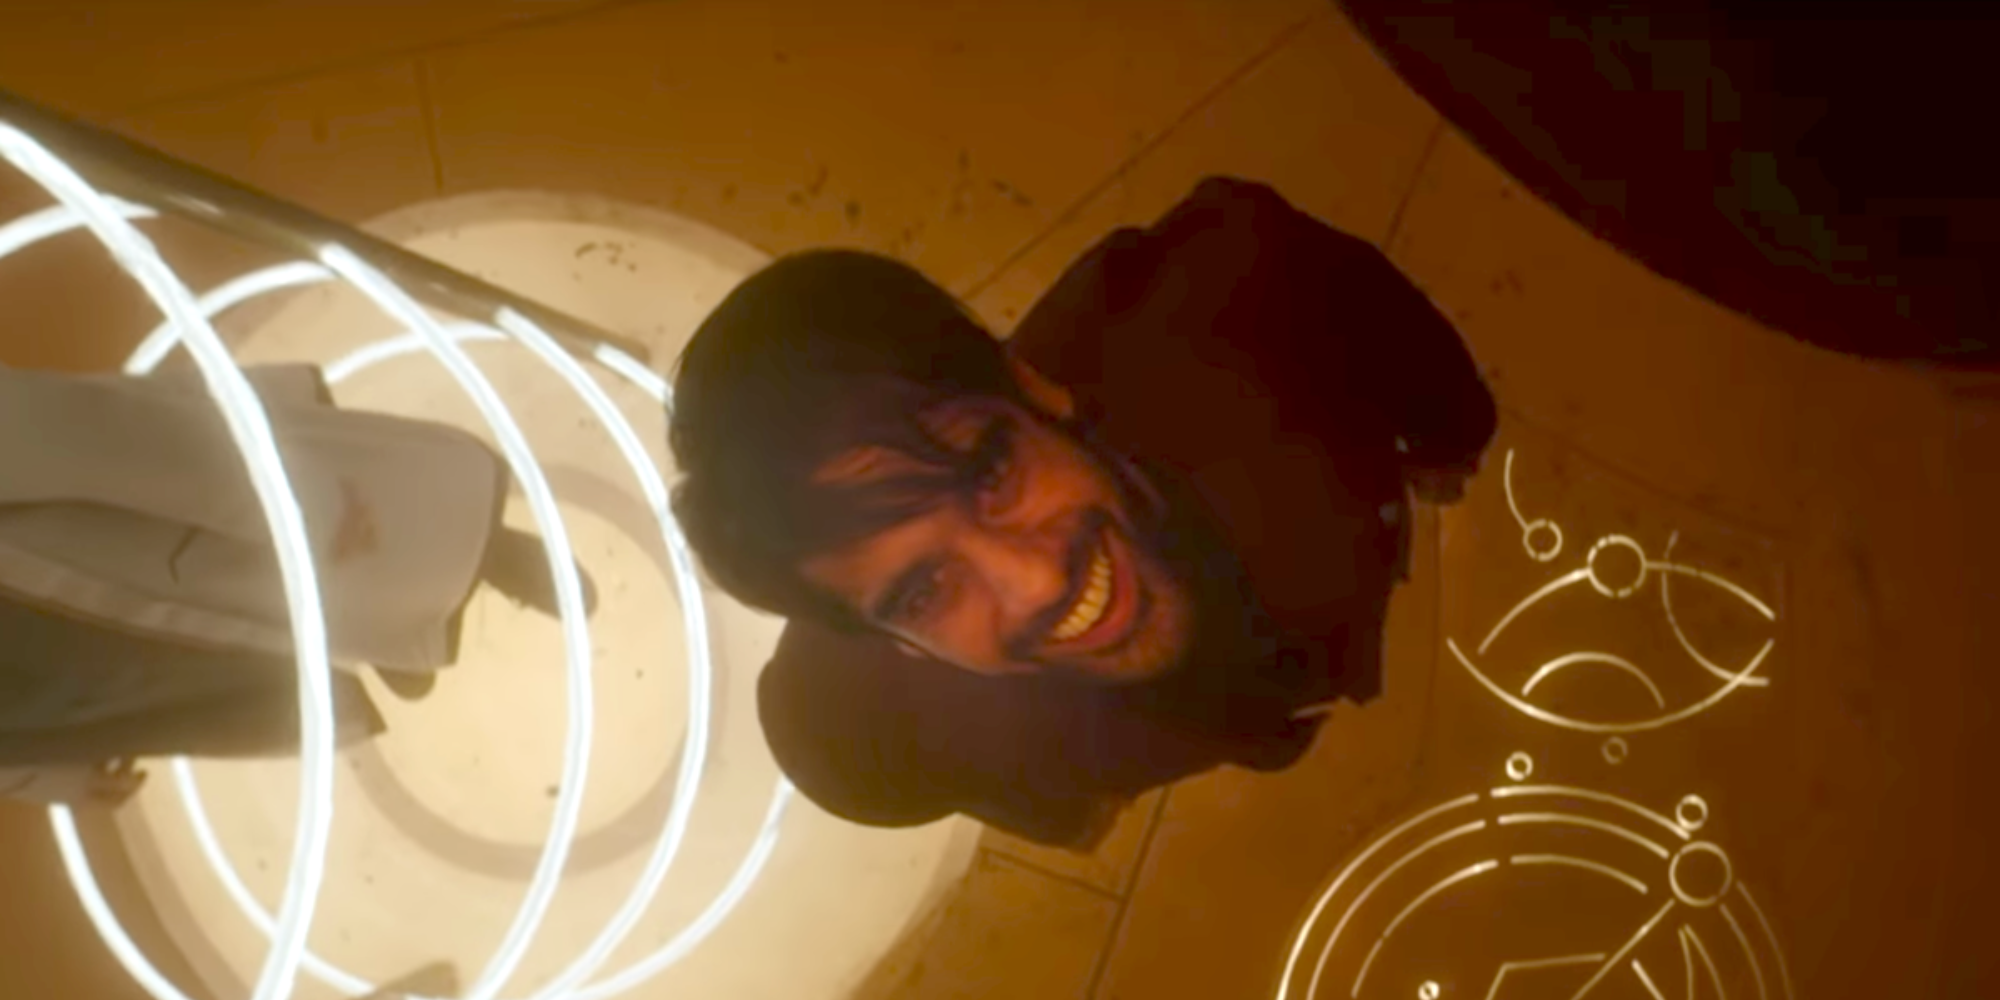 The Master cackles at the ceiling while the Doctor is trapped in a laser prison